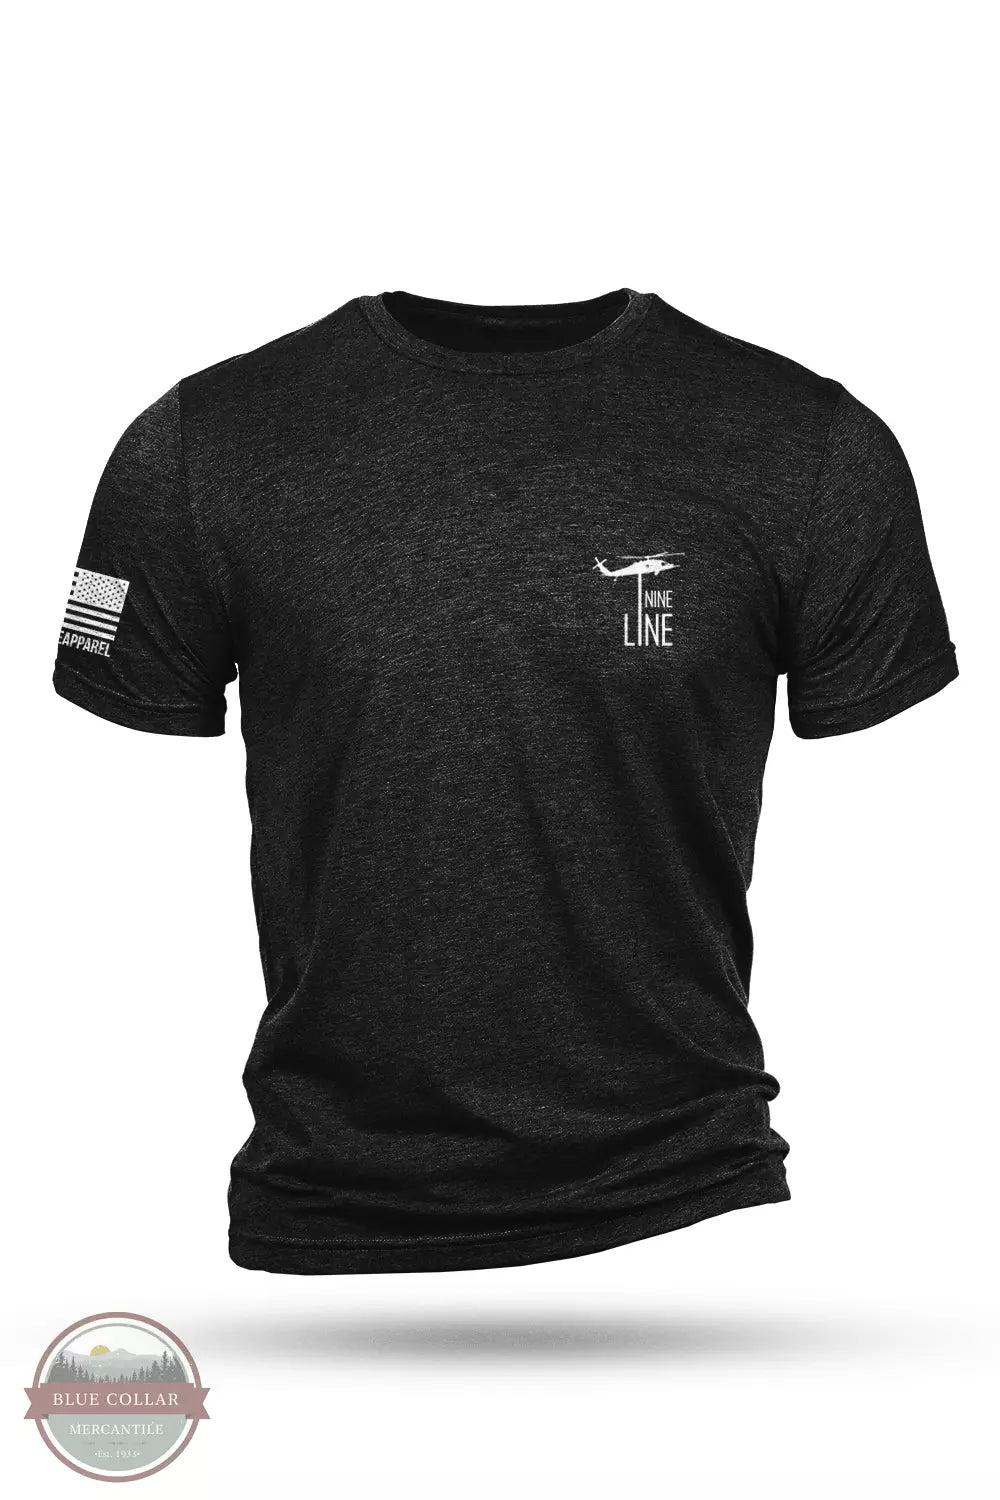 Nine Line DUTYHONOR-TSTRI-CHARCOALBLACK Duty Honor Courage Tri-Blend Short Sleeve T-Shirt in Charcoal Black Front View